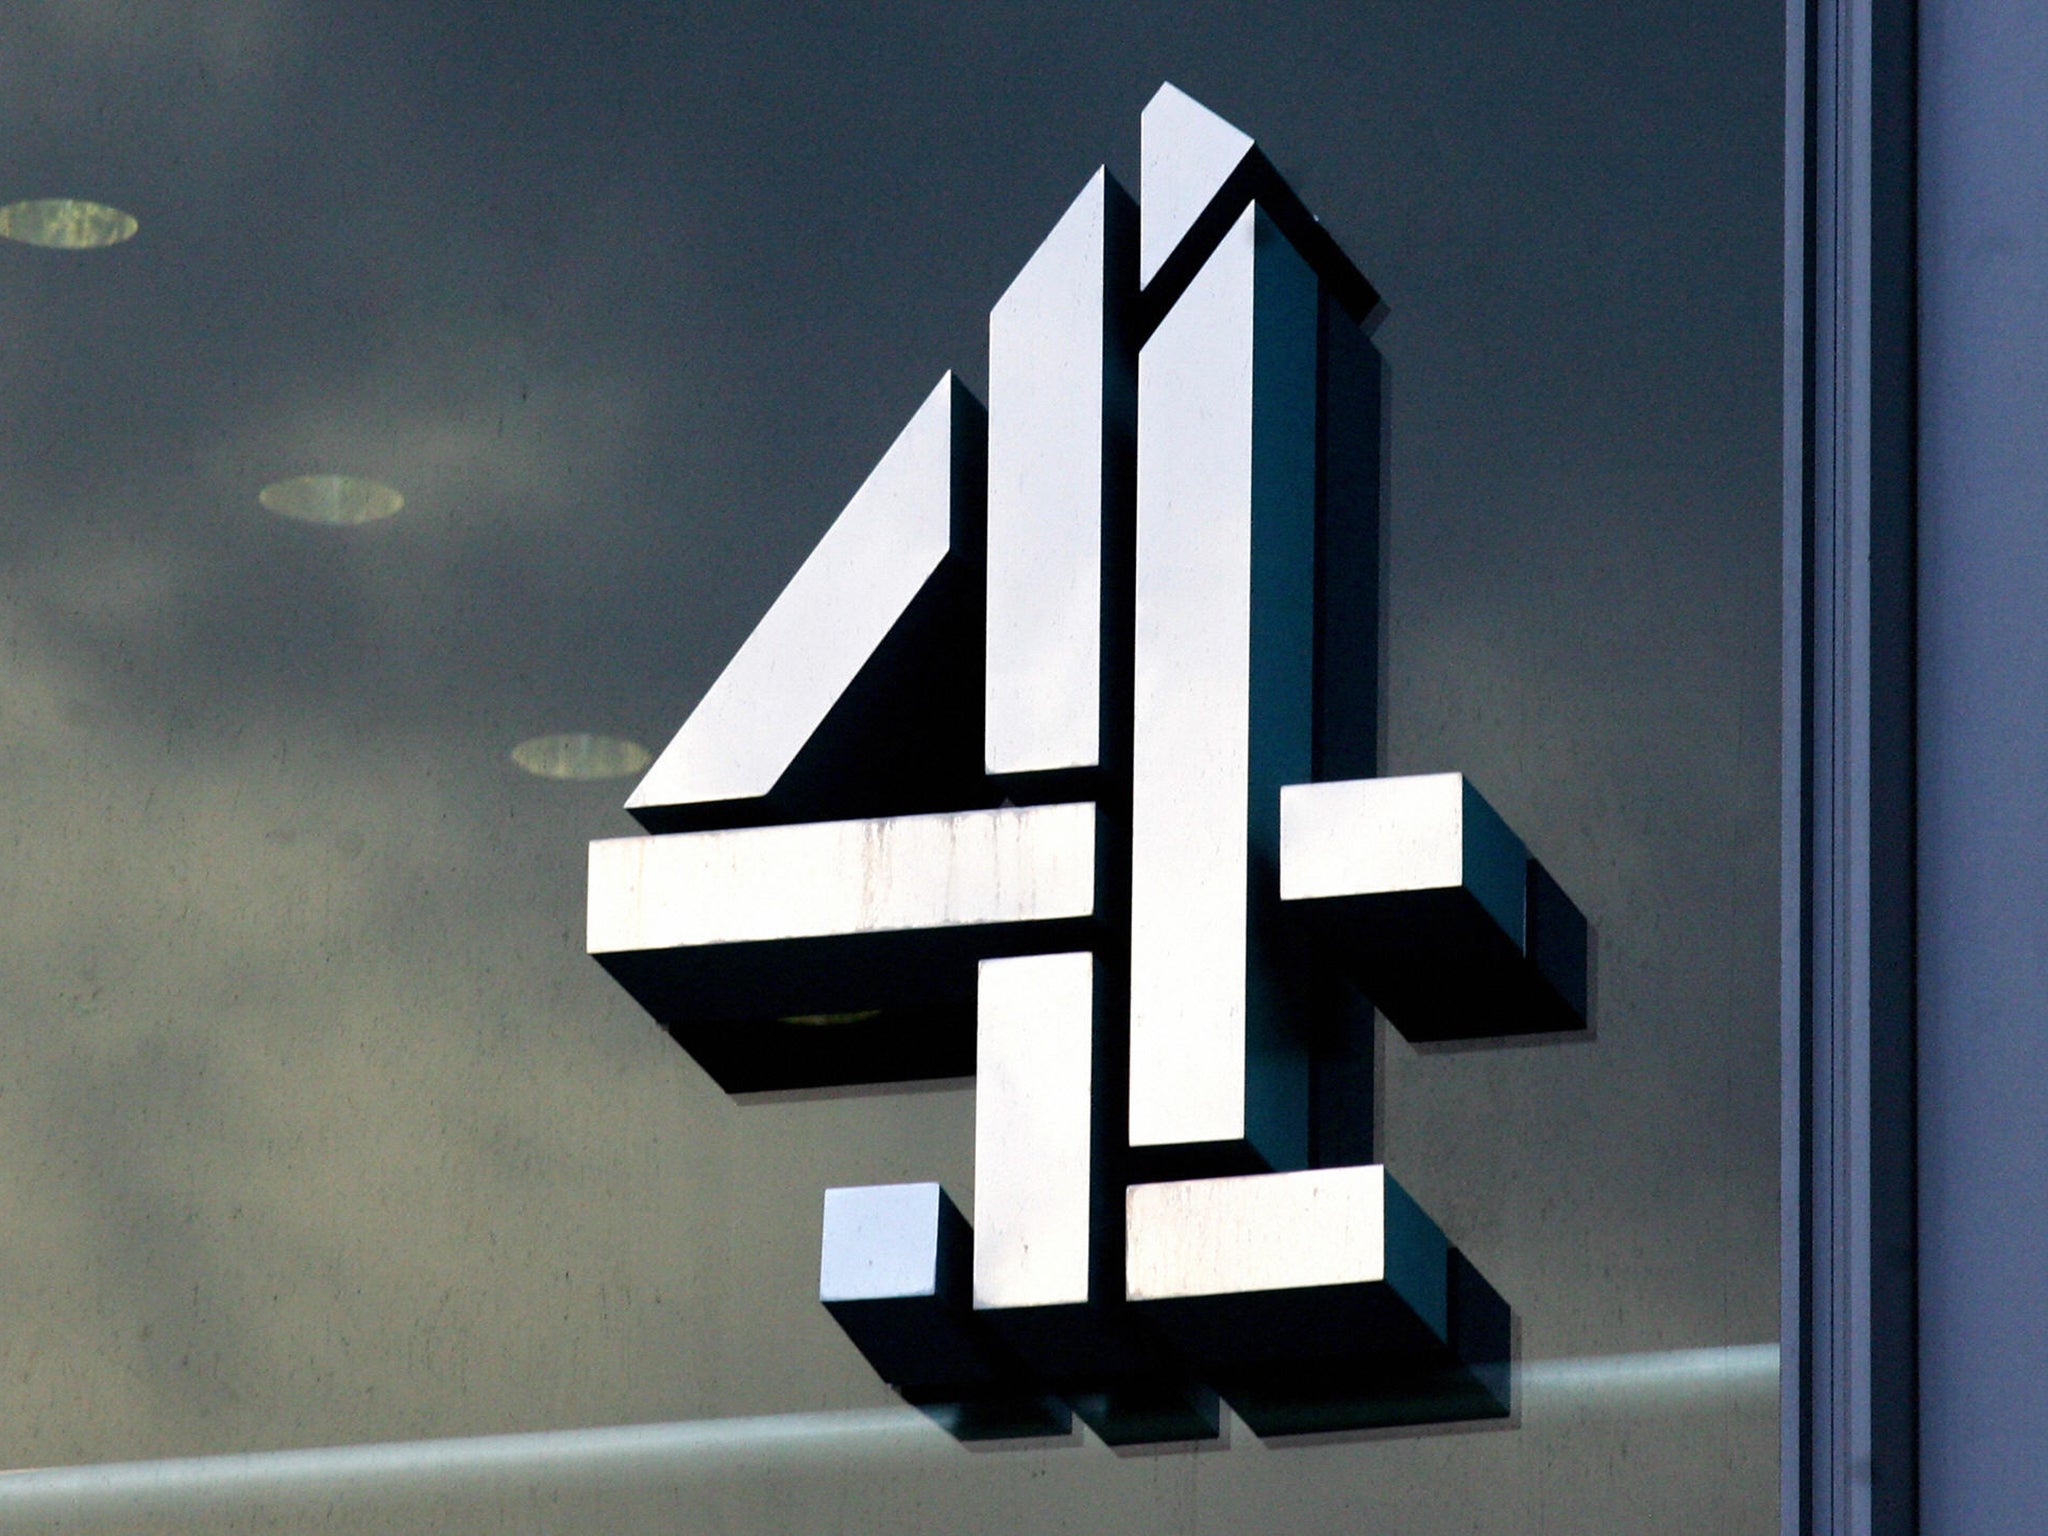 Channel 4 announced its intention to move staff out of London to three new bases after the government said the broadcaster would remain publicly owned, but faced being relocated